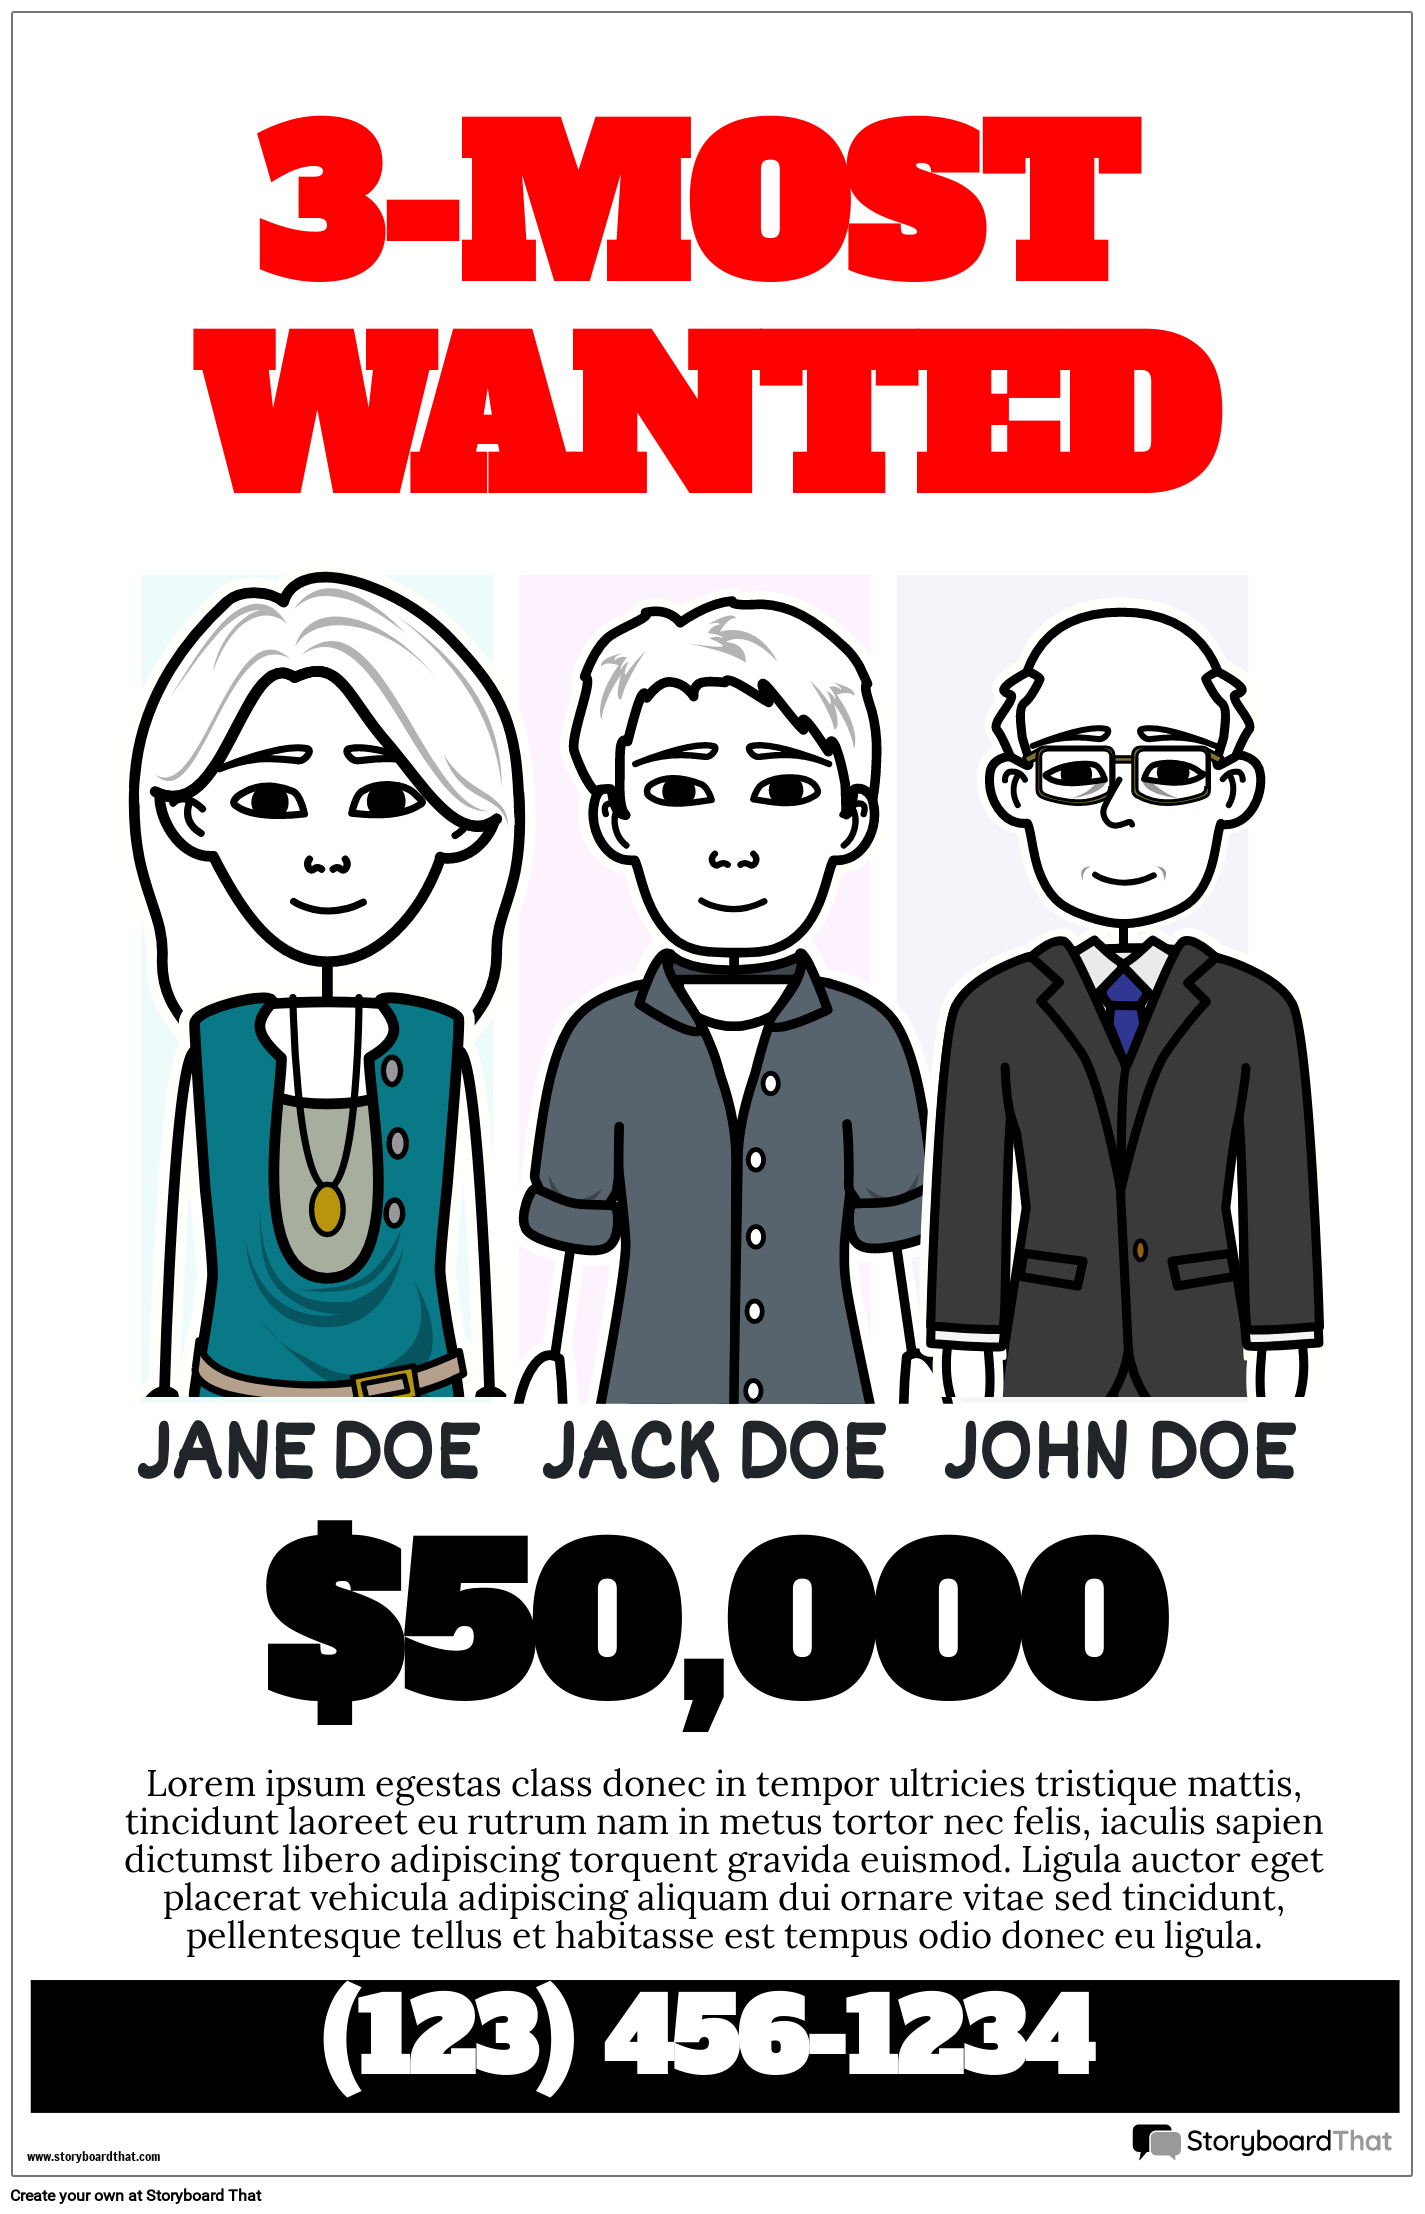 Wanted poster for three suspects